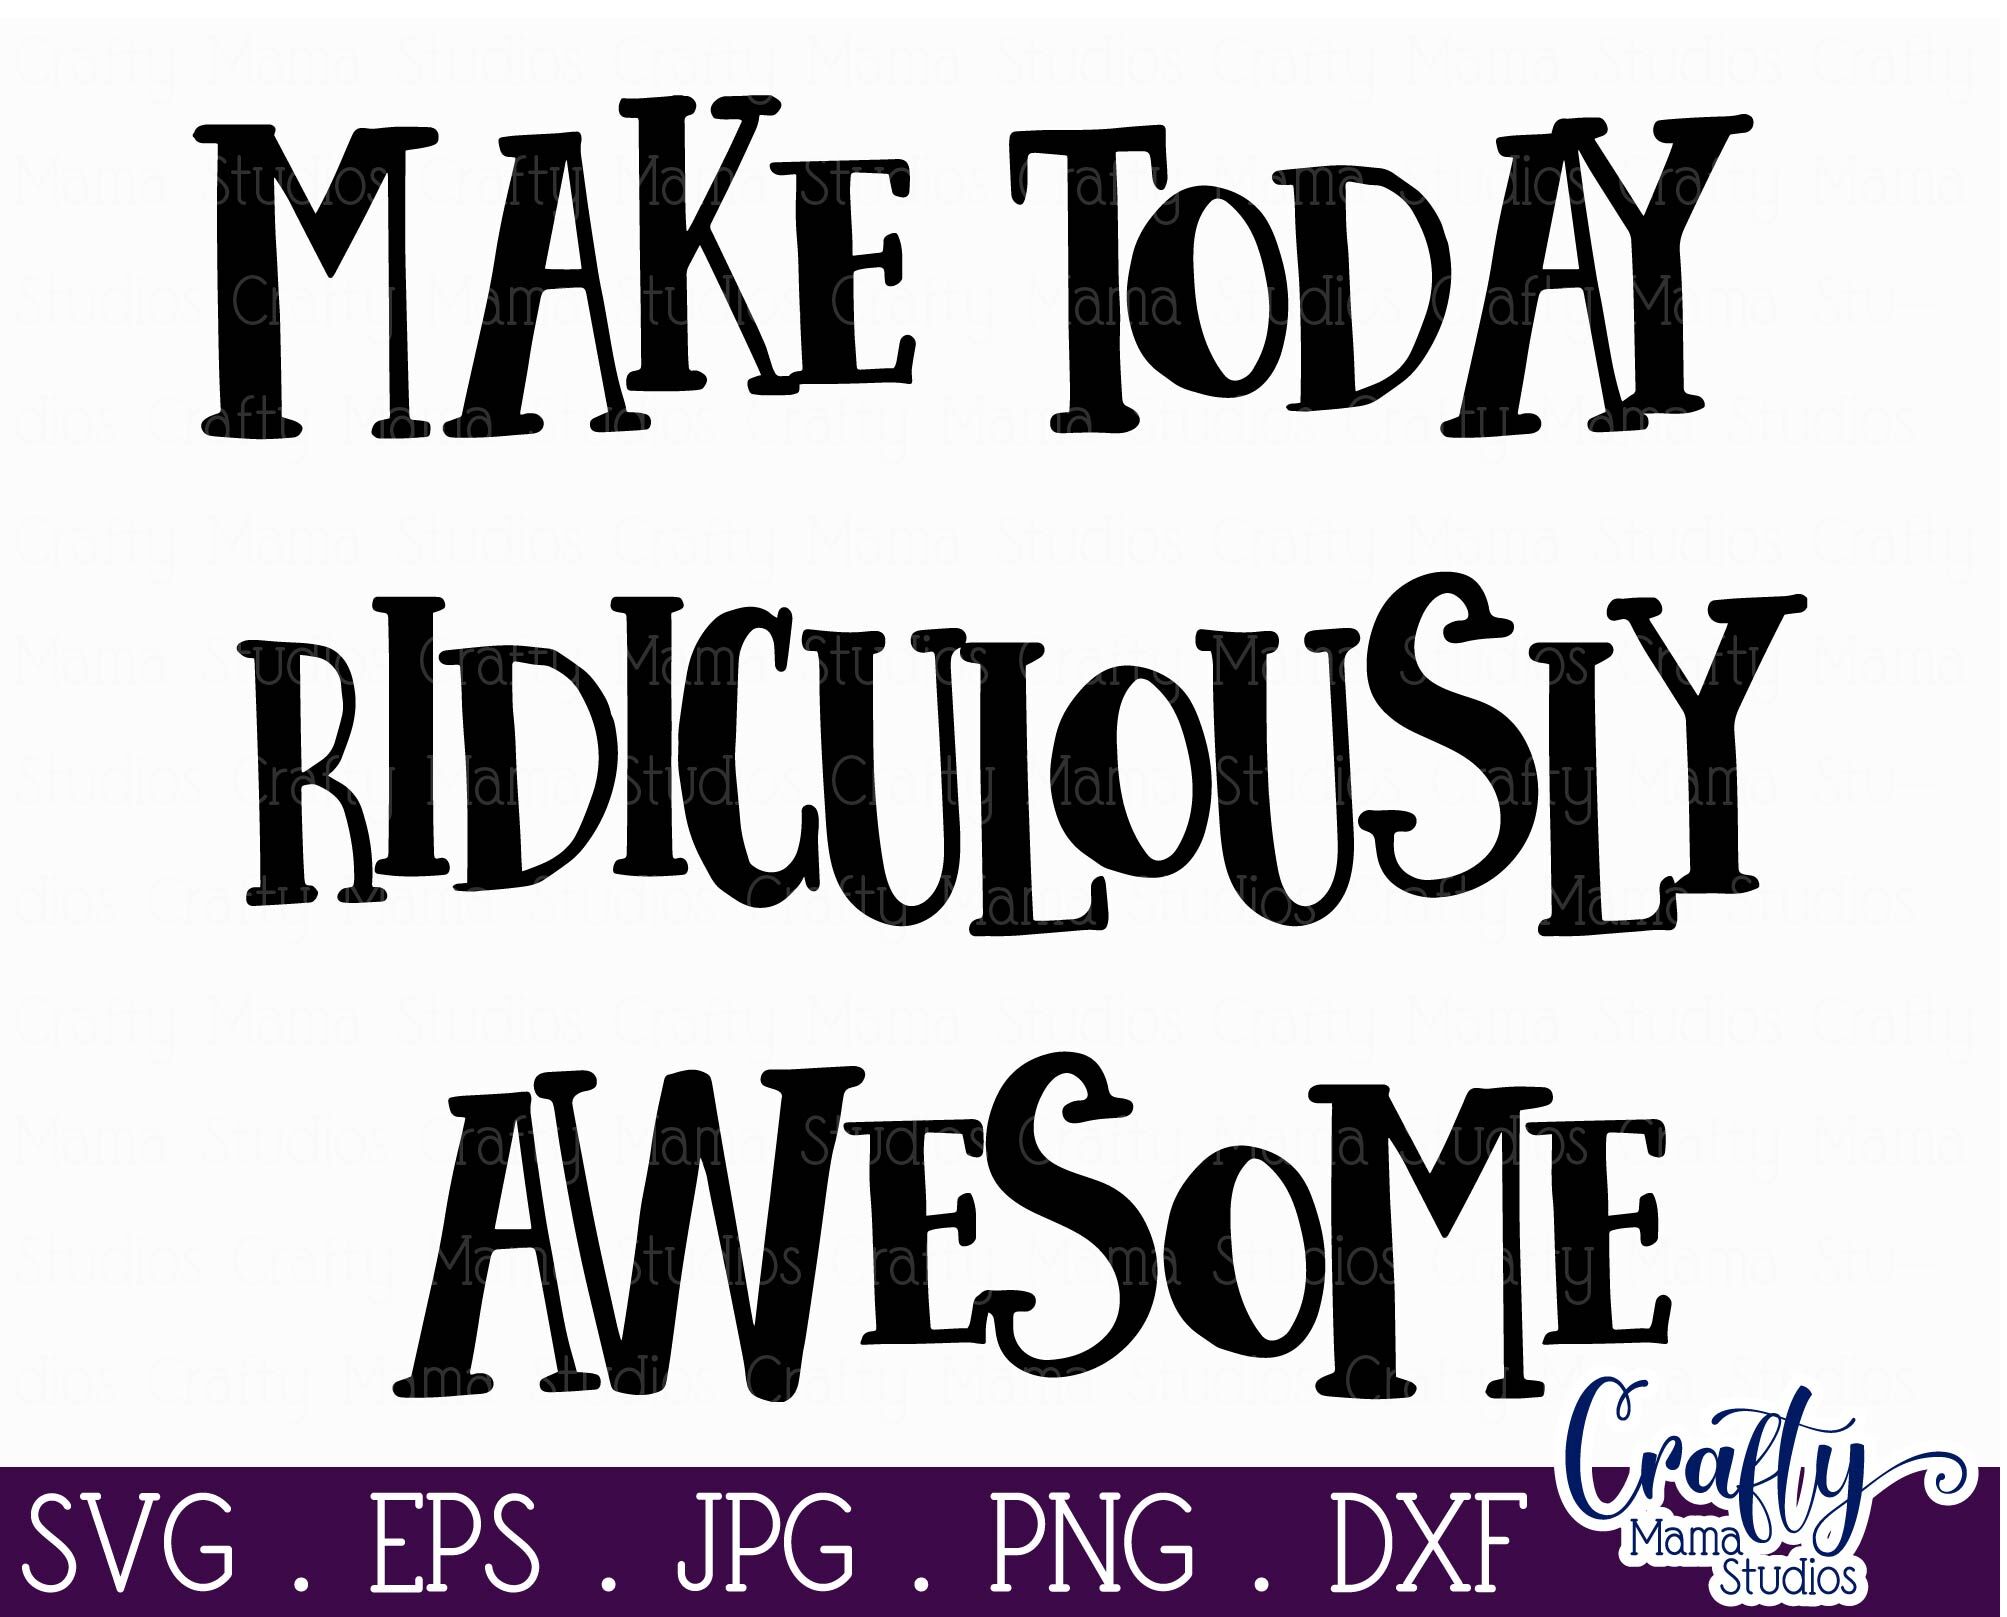 Inspirational Svg - Make Today Ridiculously Awesome SVG By Crafty Mama ...